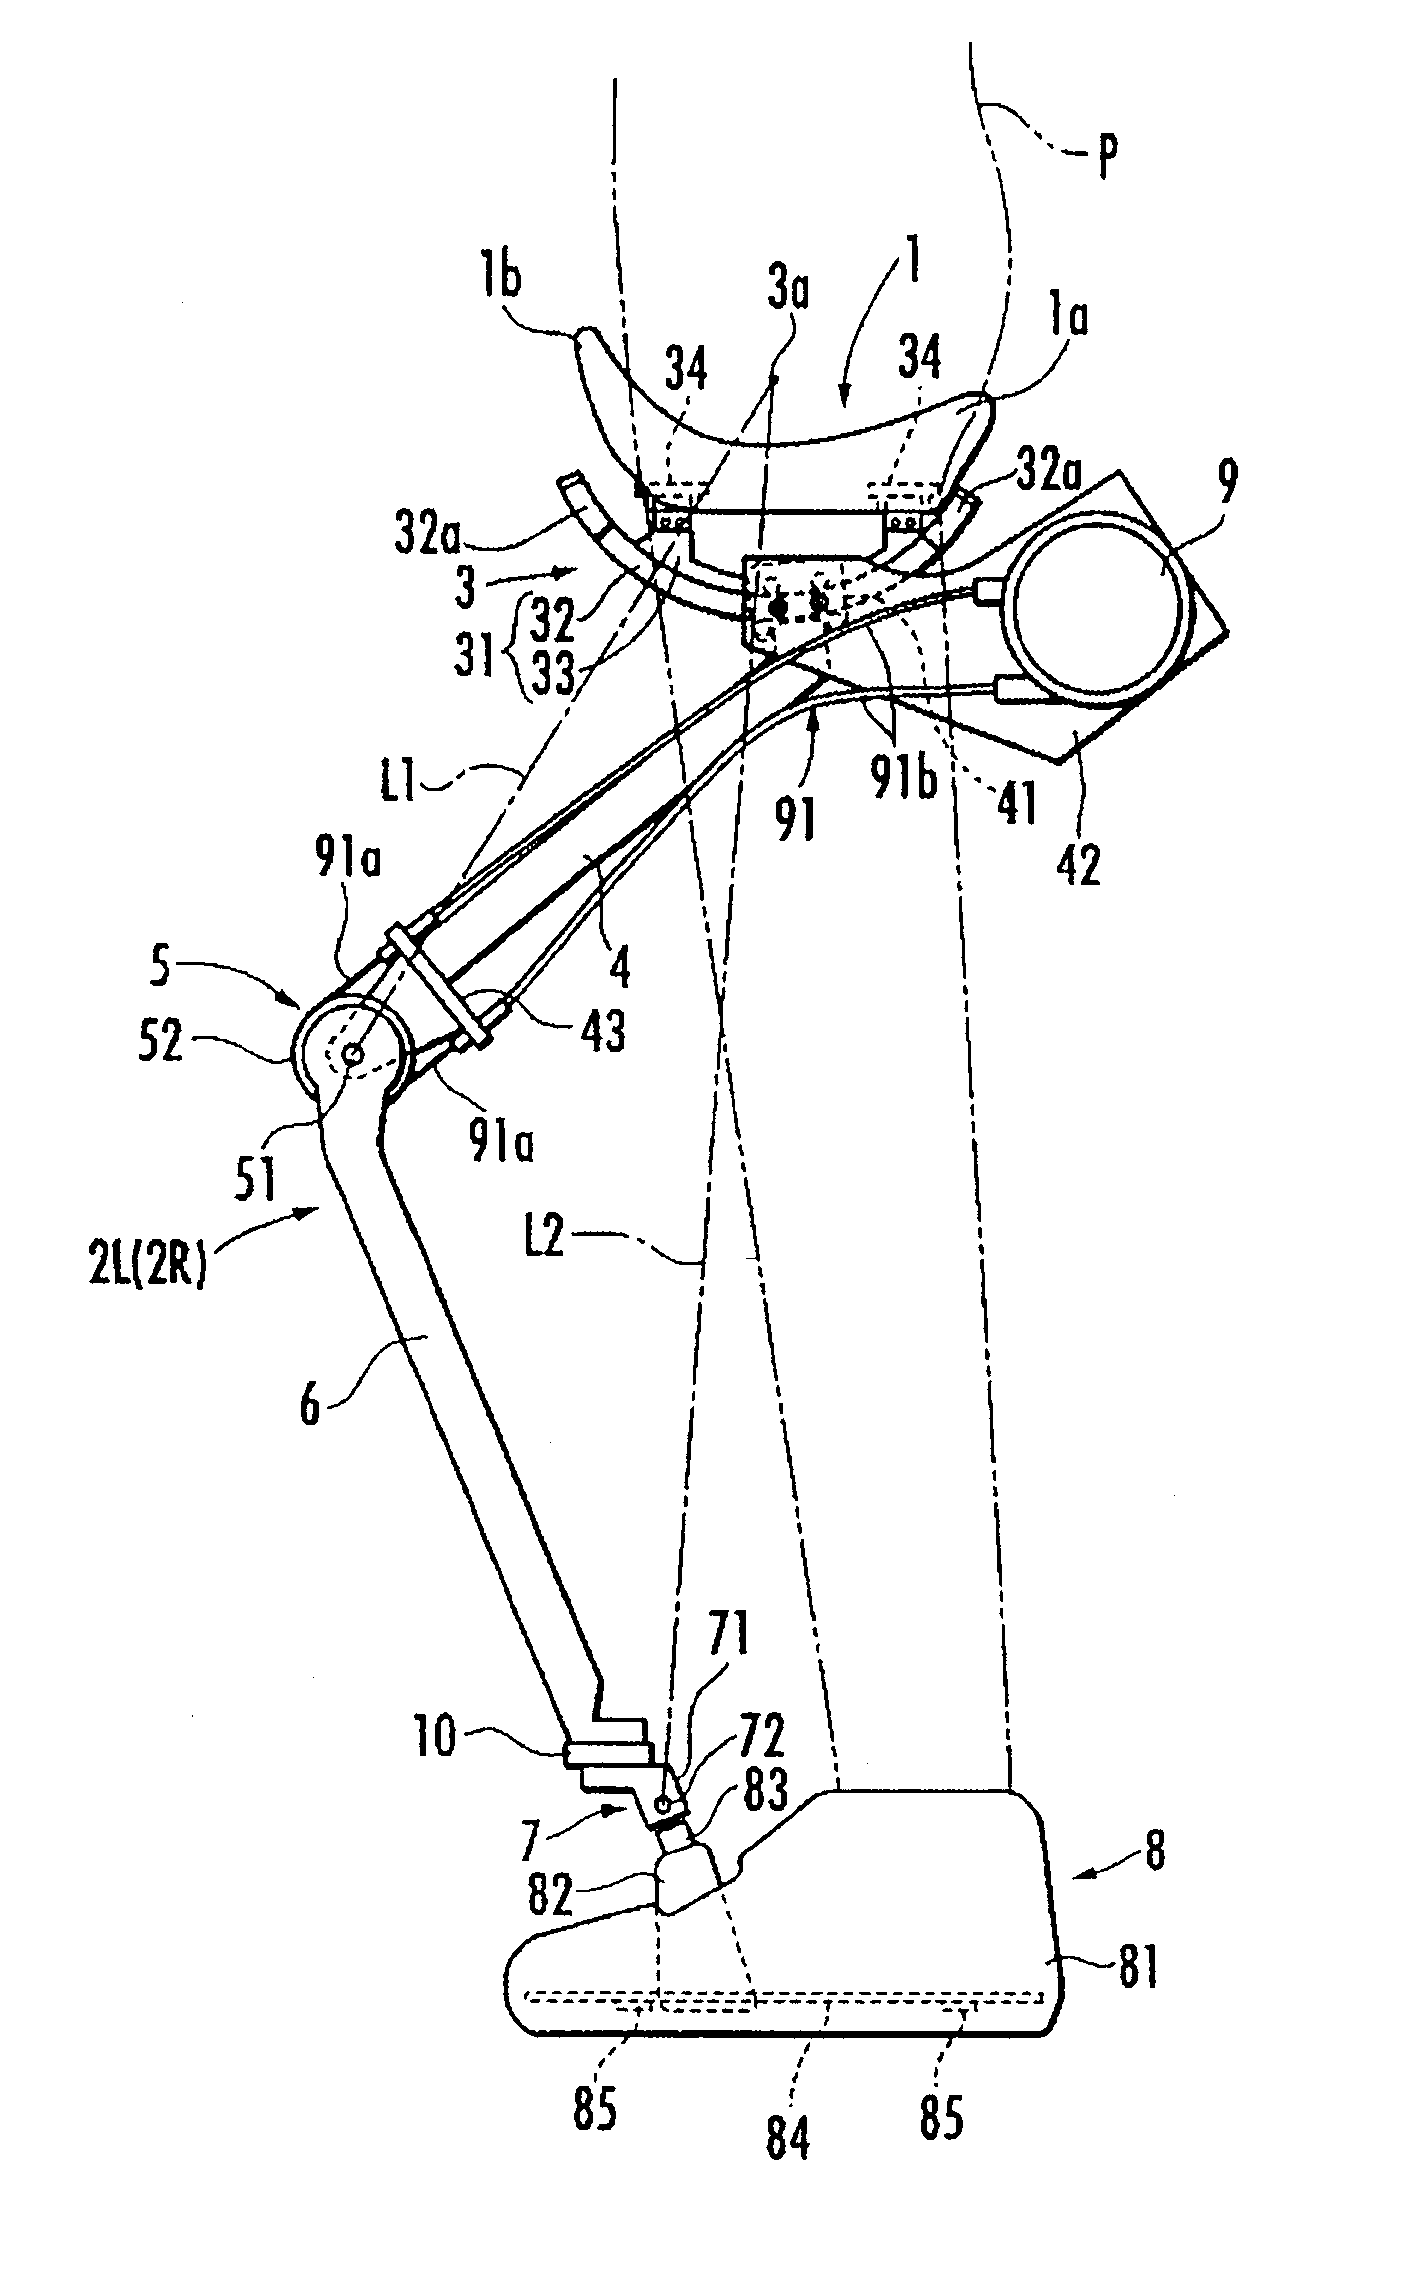 Walking Assisting Device